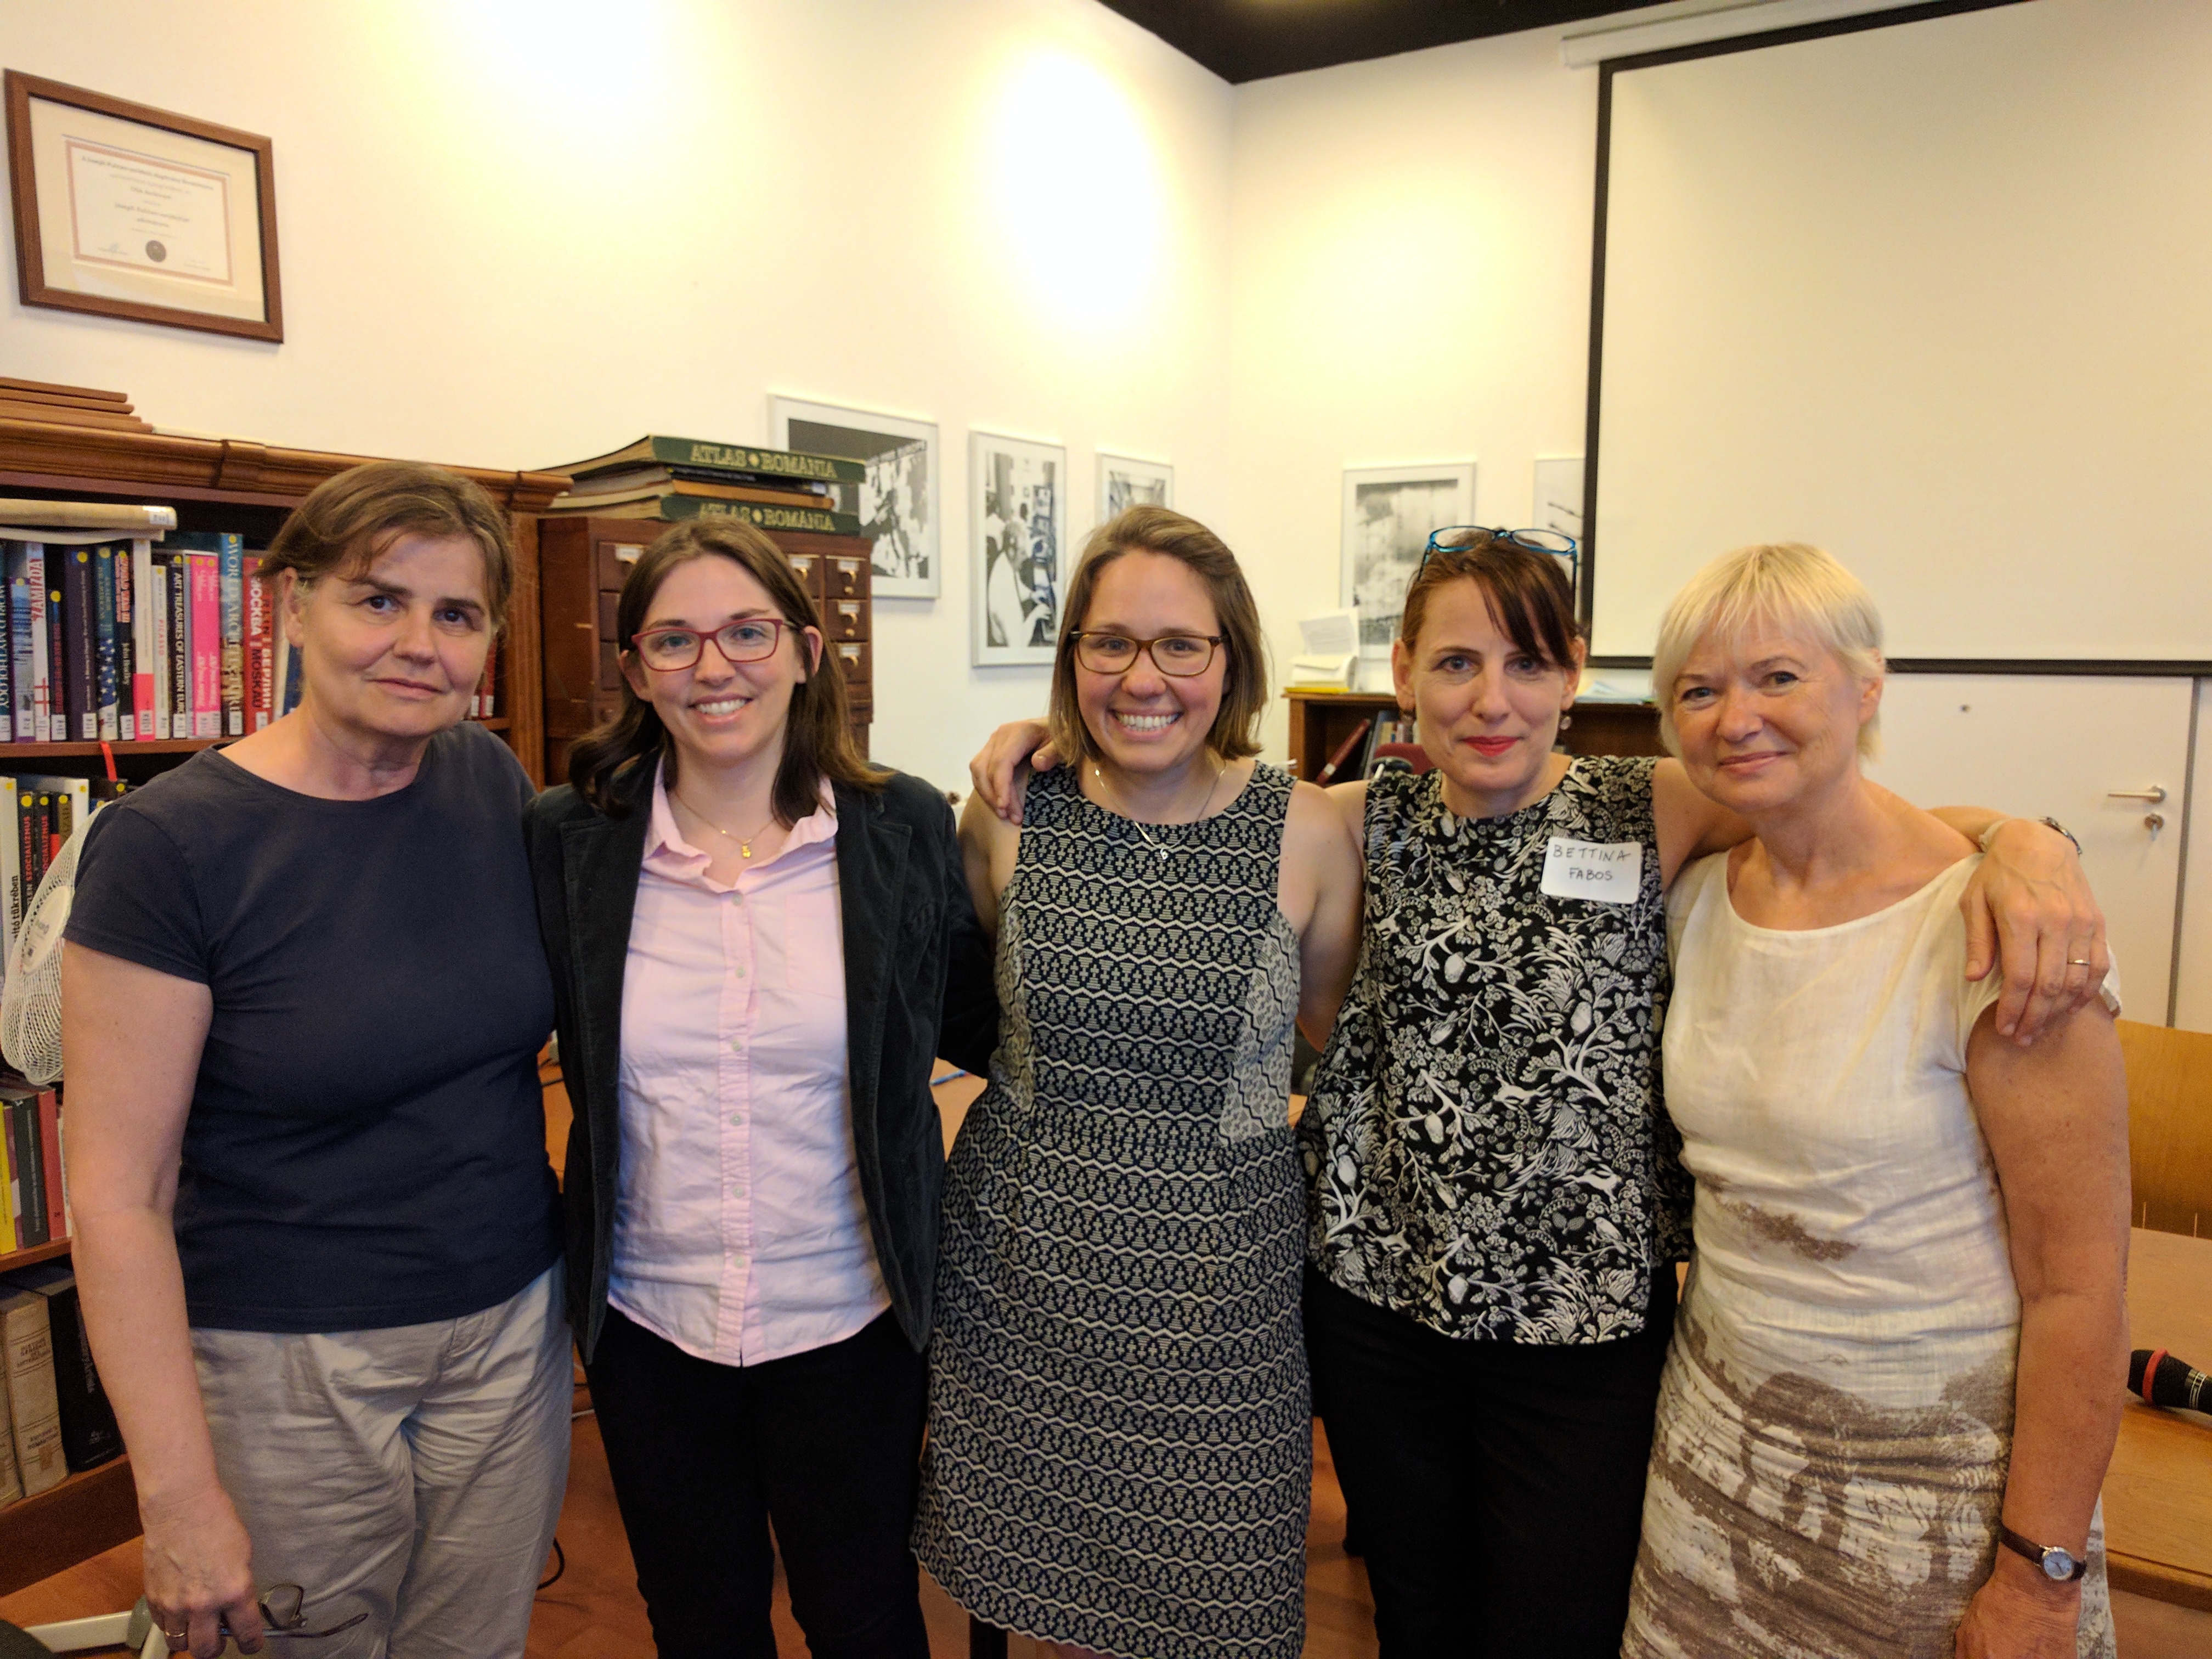 Annamária Sas (Fulbright Hungary American Program Officer), Leslie Waters, Kristina E. Poznan, Bettina Fabos, and Márta Nagy (Fulbright Grantee to the Univ. of Iowa, 2015) at the 2017 launch of Proud and Torn at the Open Society Archives in Budapest.